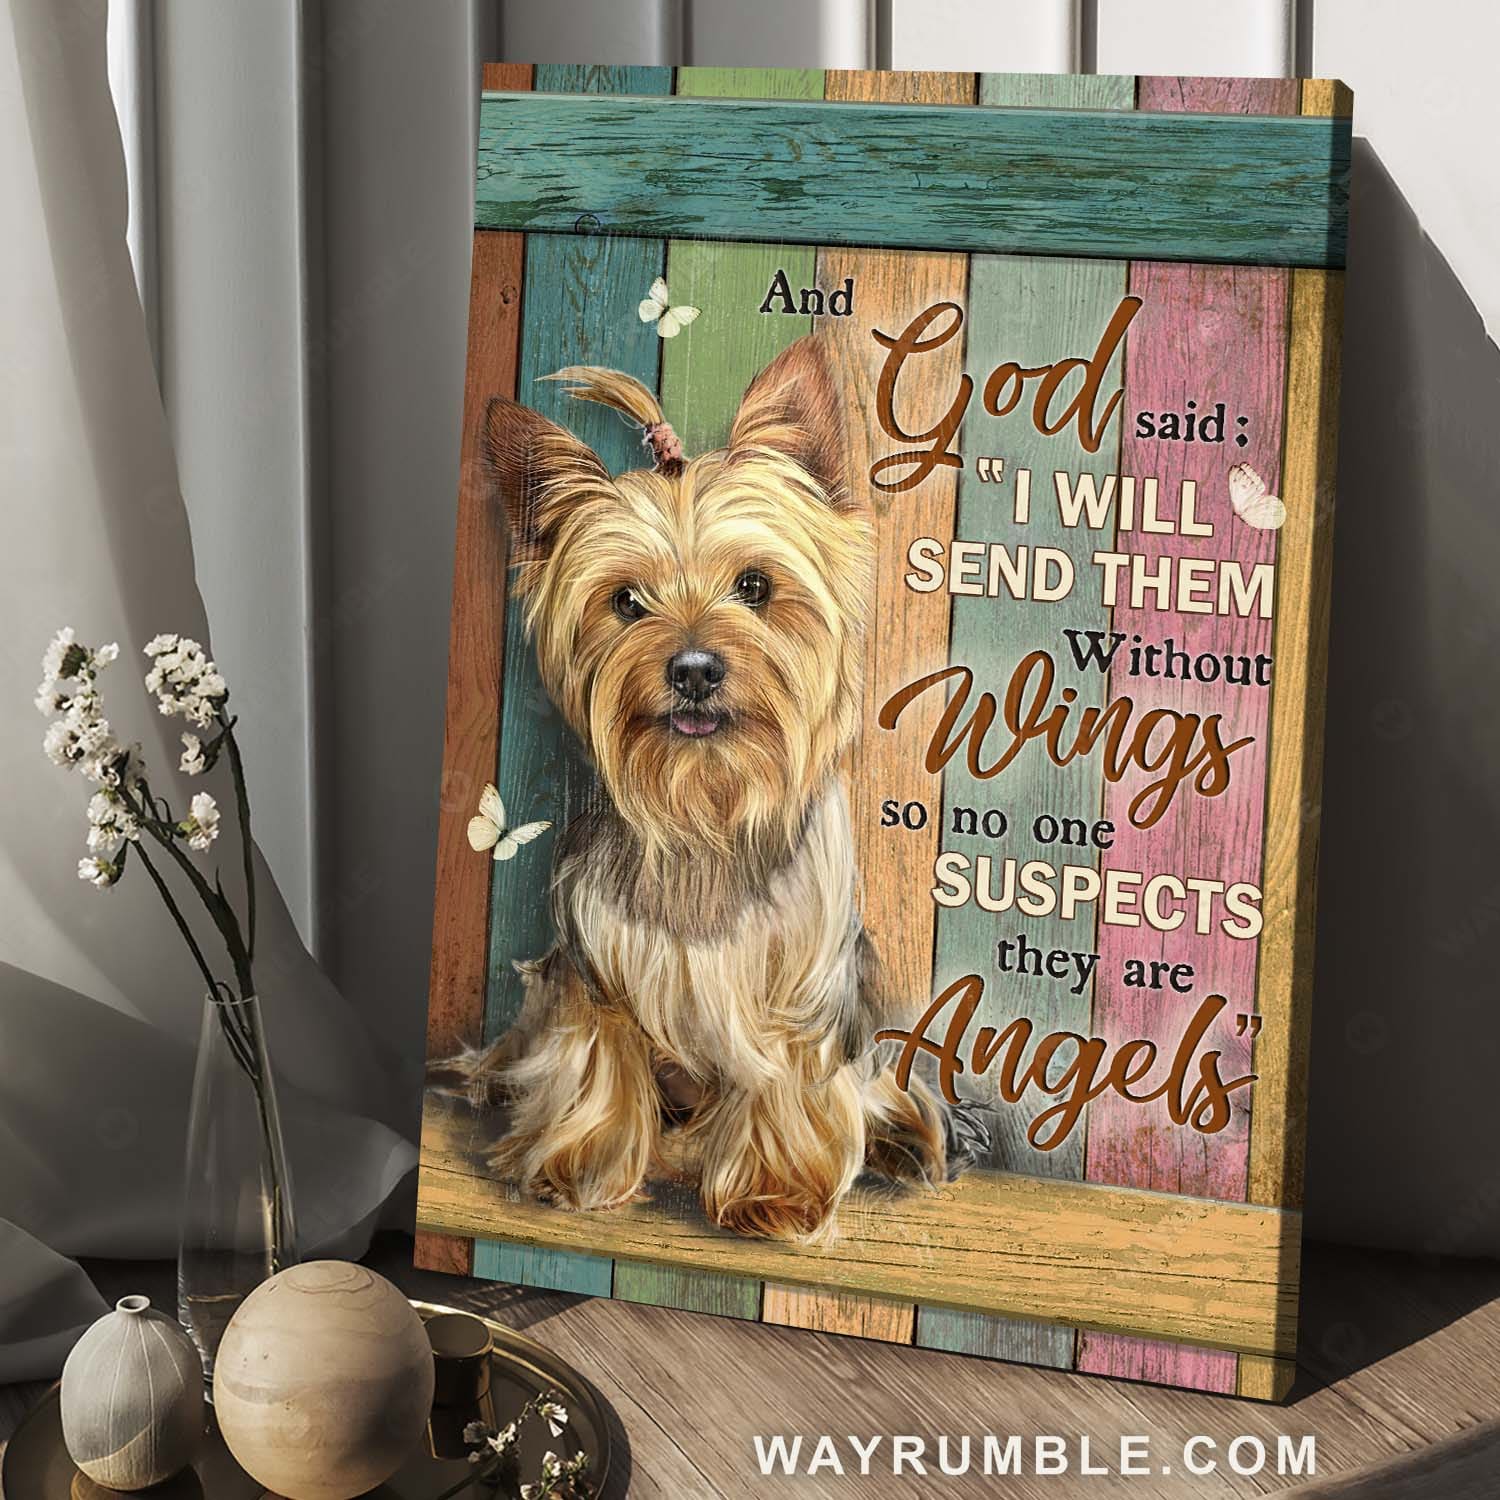 Yorkshire Terrier, Dog lover, Jesus call, Memorial gift, I will send them without wings - Jesus Portrait Canvas Prints, Home Decor Wall Art